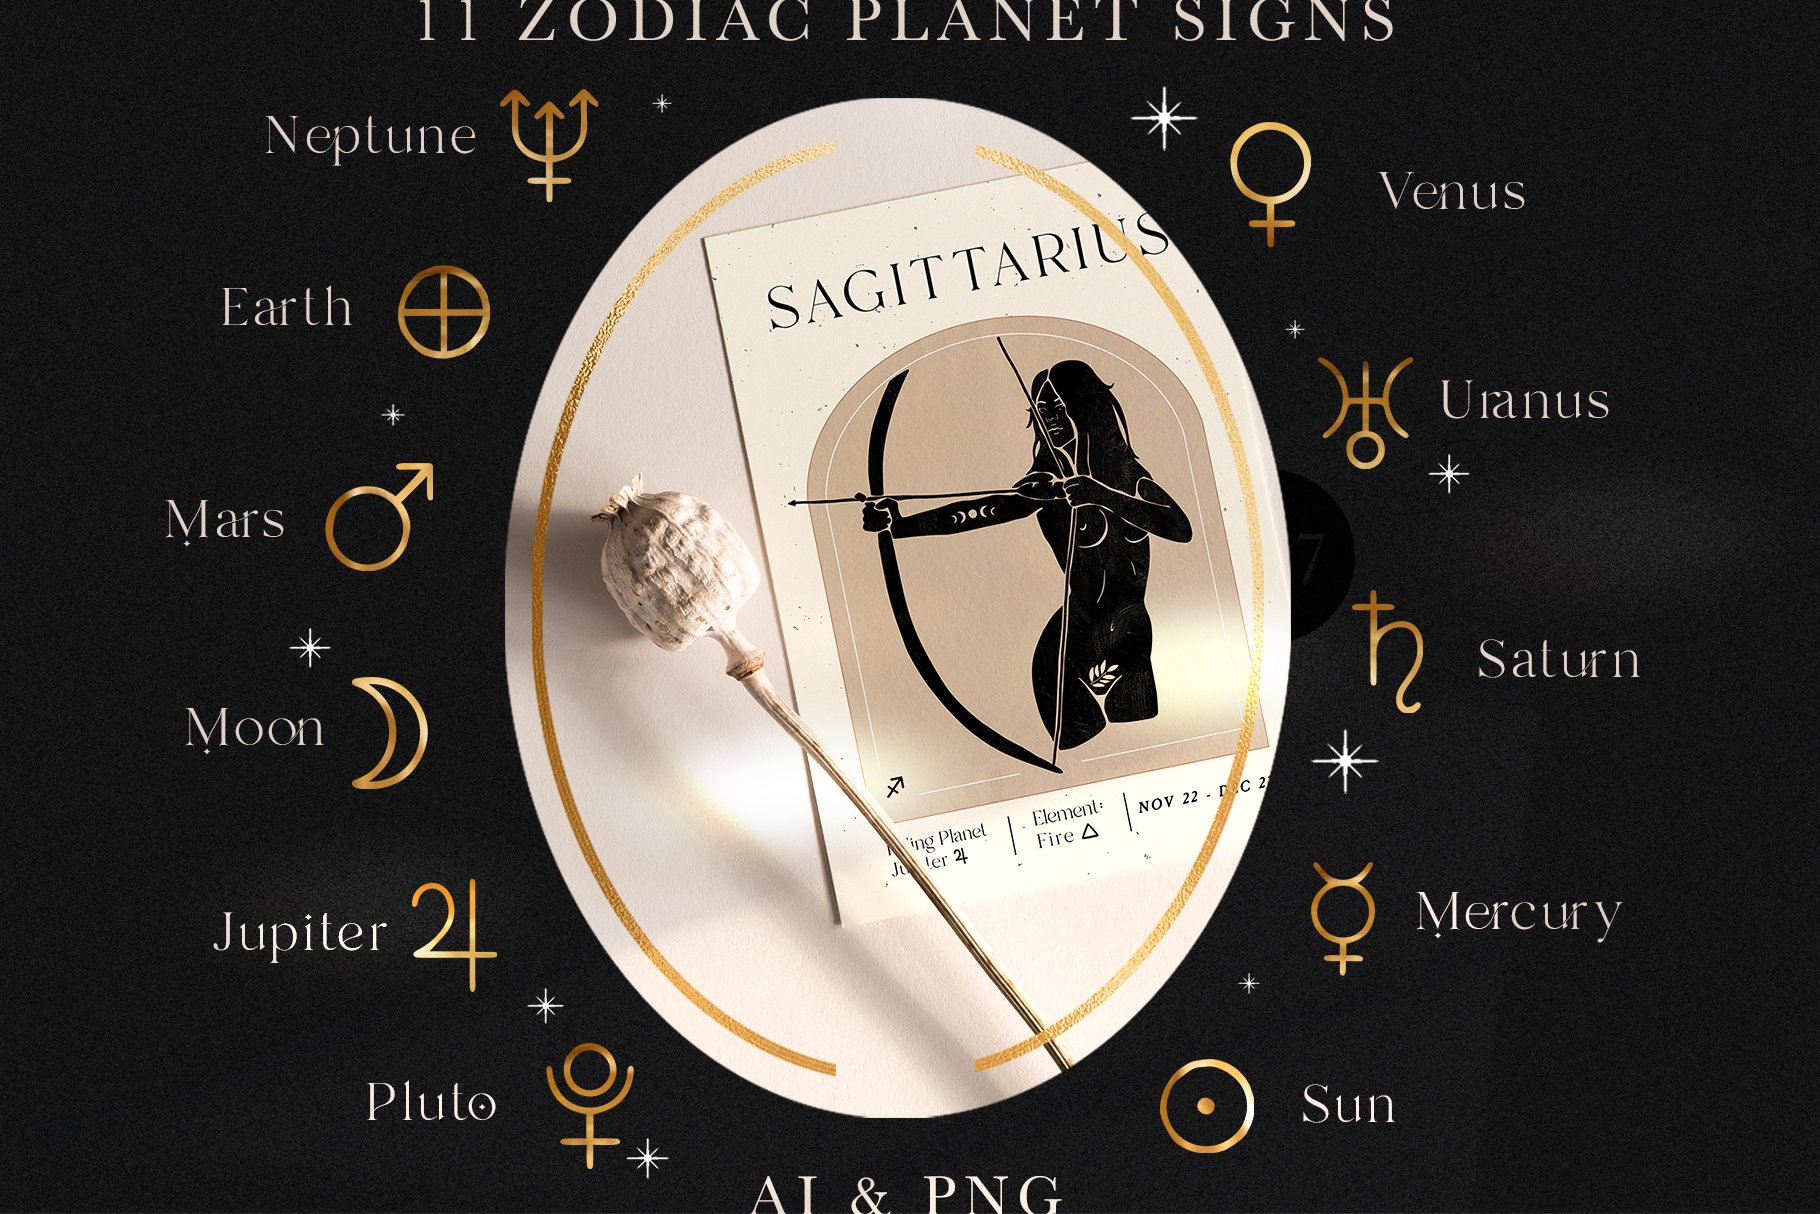 You will get 11 zodiac planet signs.